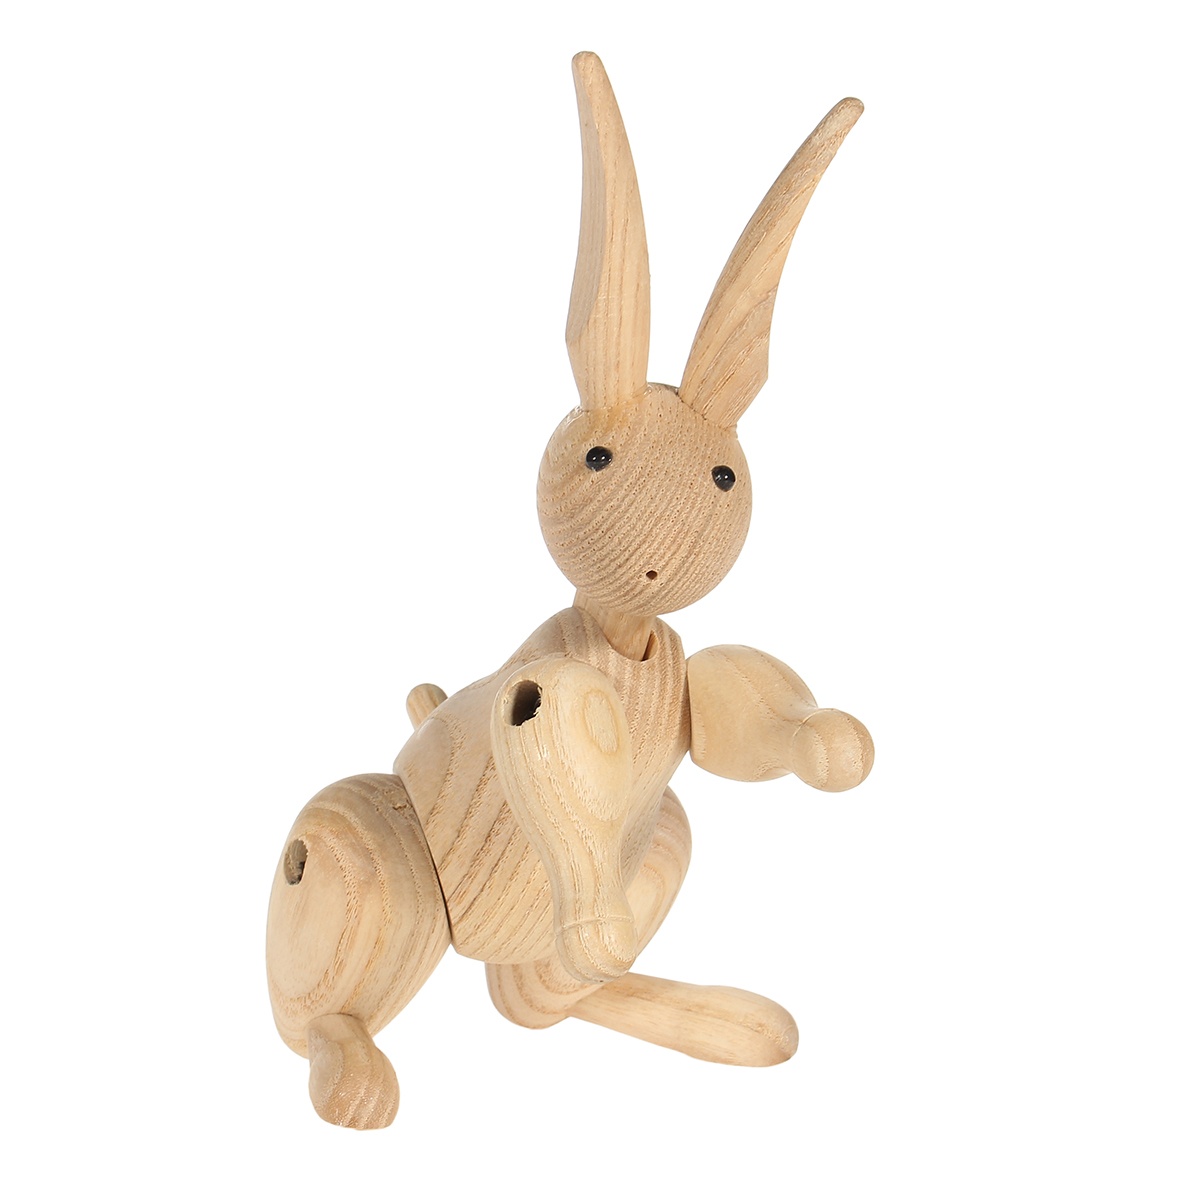 Wood-Carving-Miss-Rabbit-Figurines-Joints-Puppets-Animal-Art-Home-Decoration-Crafts-1241724-5